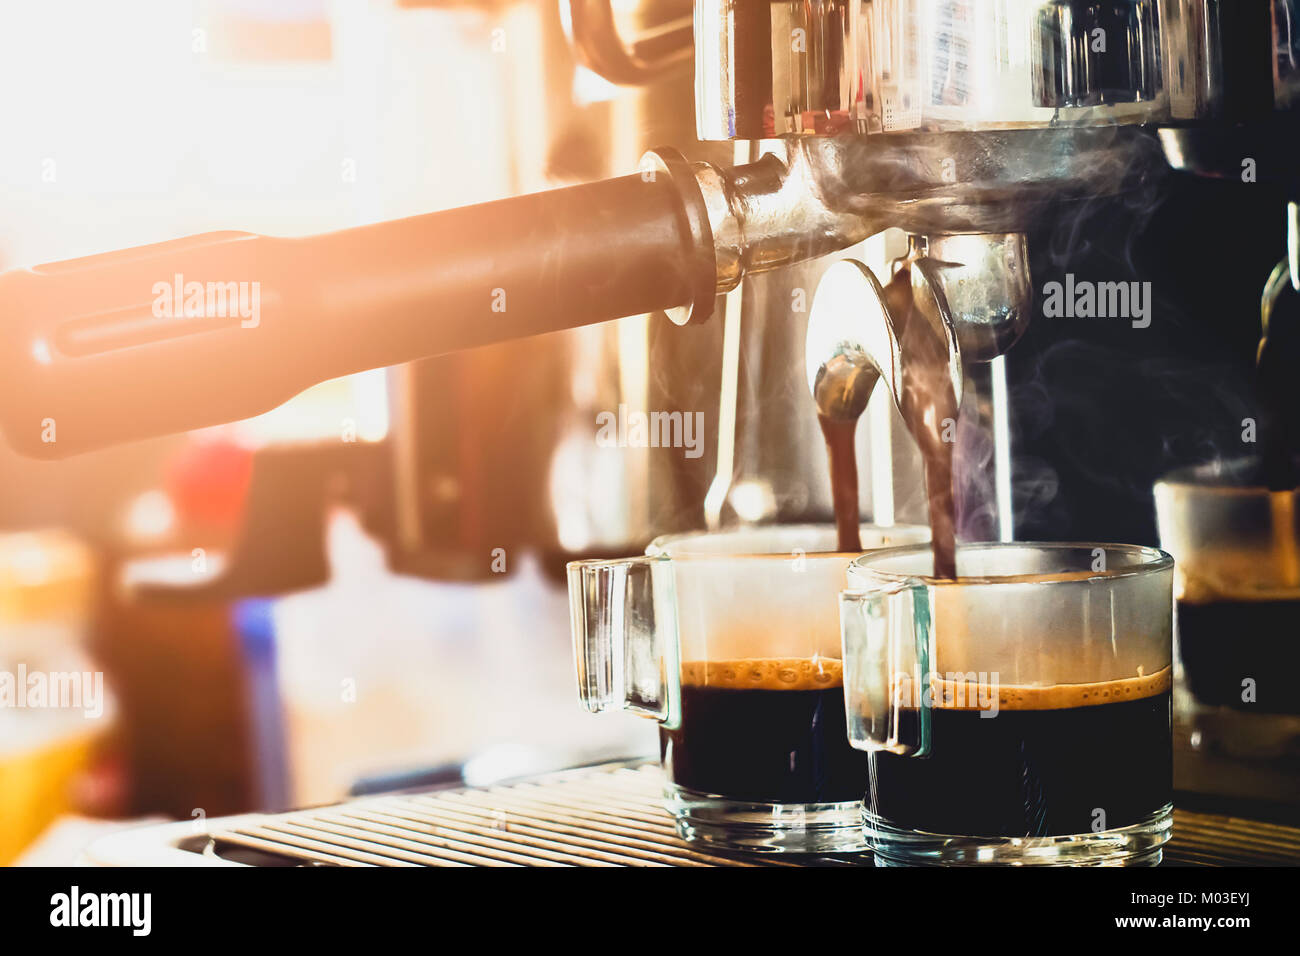 Close-up Of Espresso Machine Pouring Coffee In A Glass Stock Photo